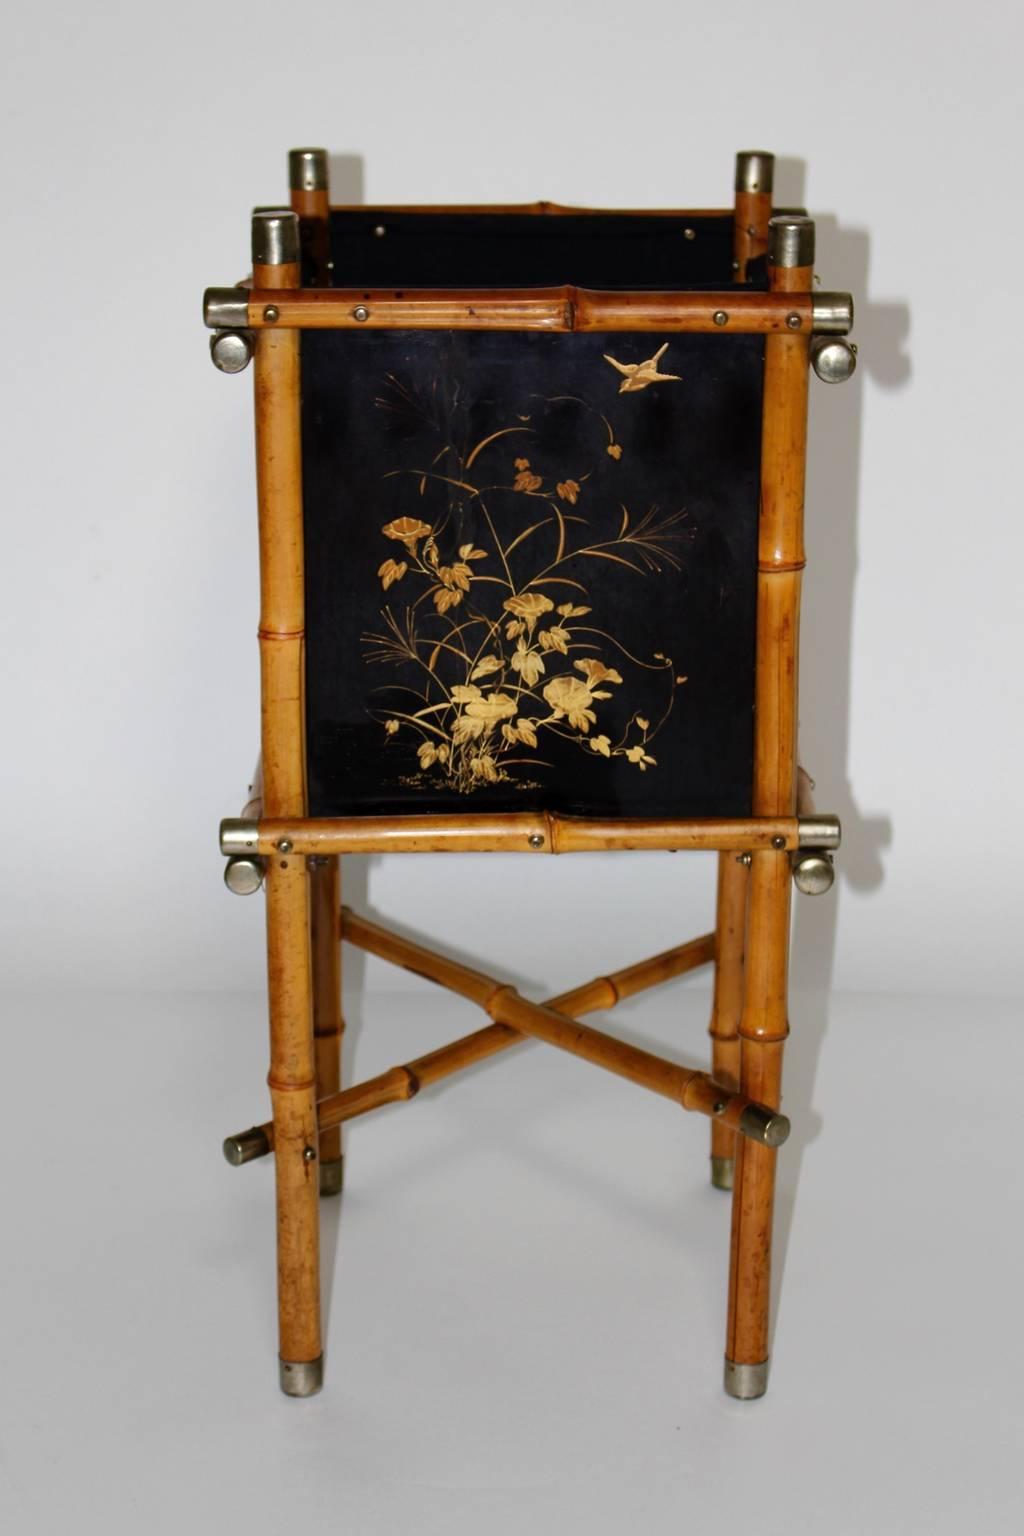 An elegant Art Deco vintage bamboo flower stand or paper basket, which features bamboo sticks. The fittings of the sticks are nickel-plated. 
The side parts are made of black plywood with golden hand-painted delicate flowers and birds and